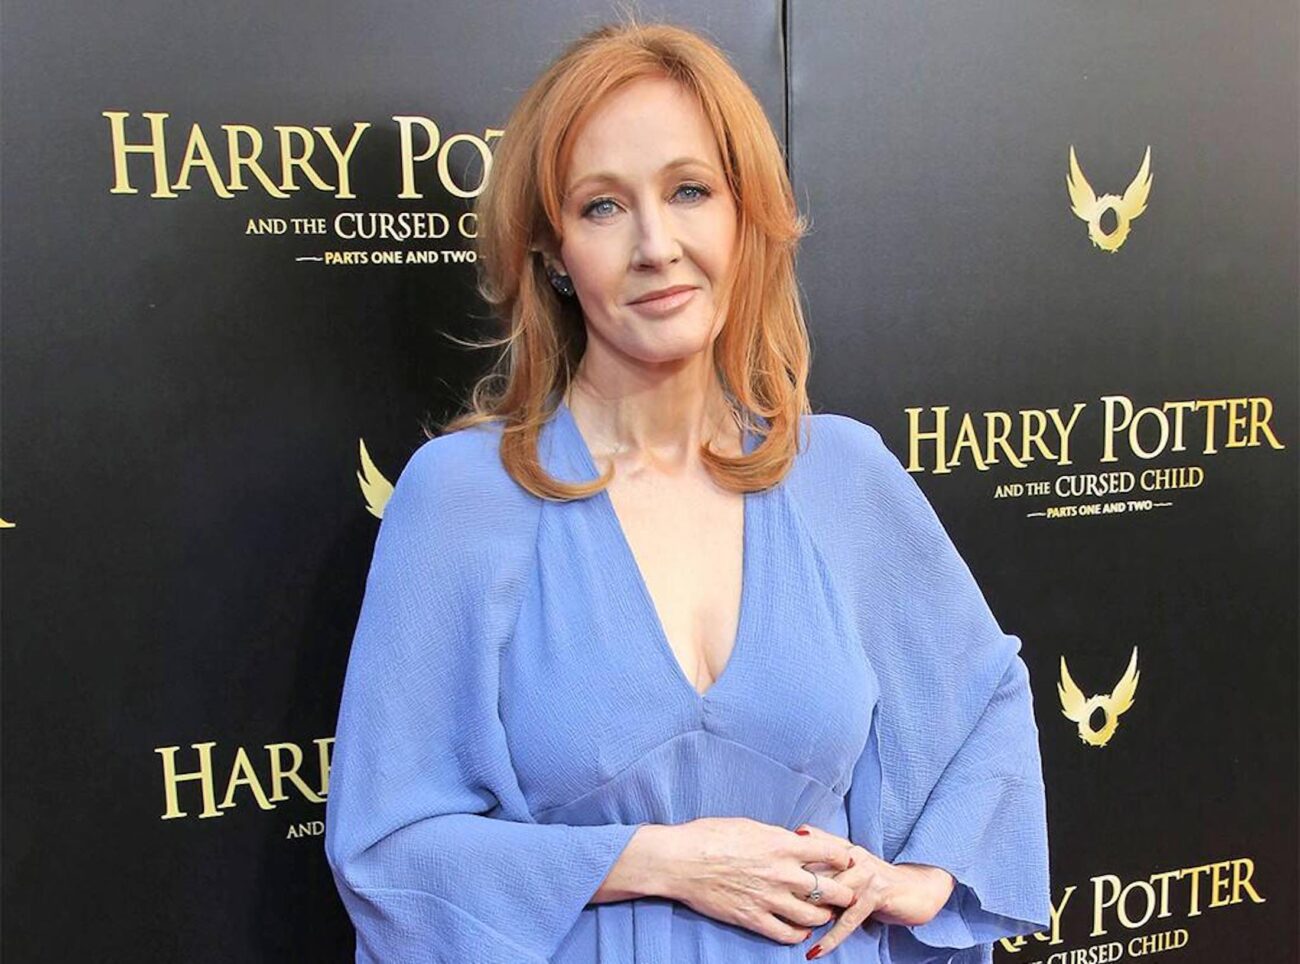 JK Rowling’s net worth went from nothing, since she was a single mother on welfare, to over $600 million presently. Here's what could go wrong.